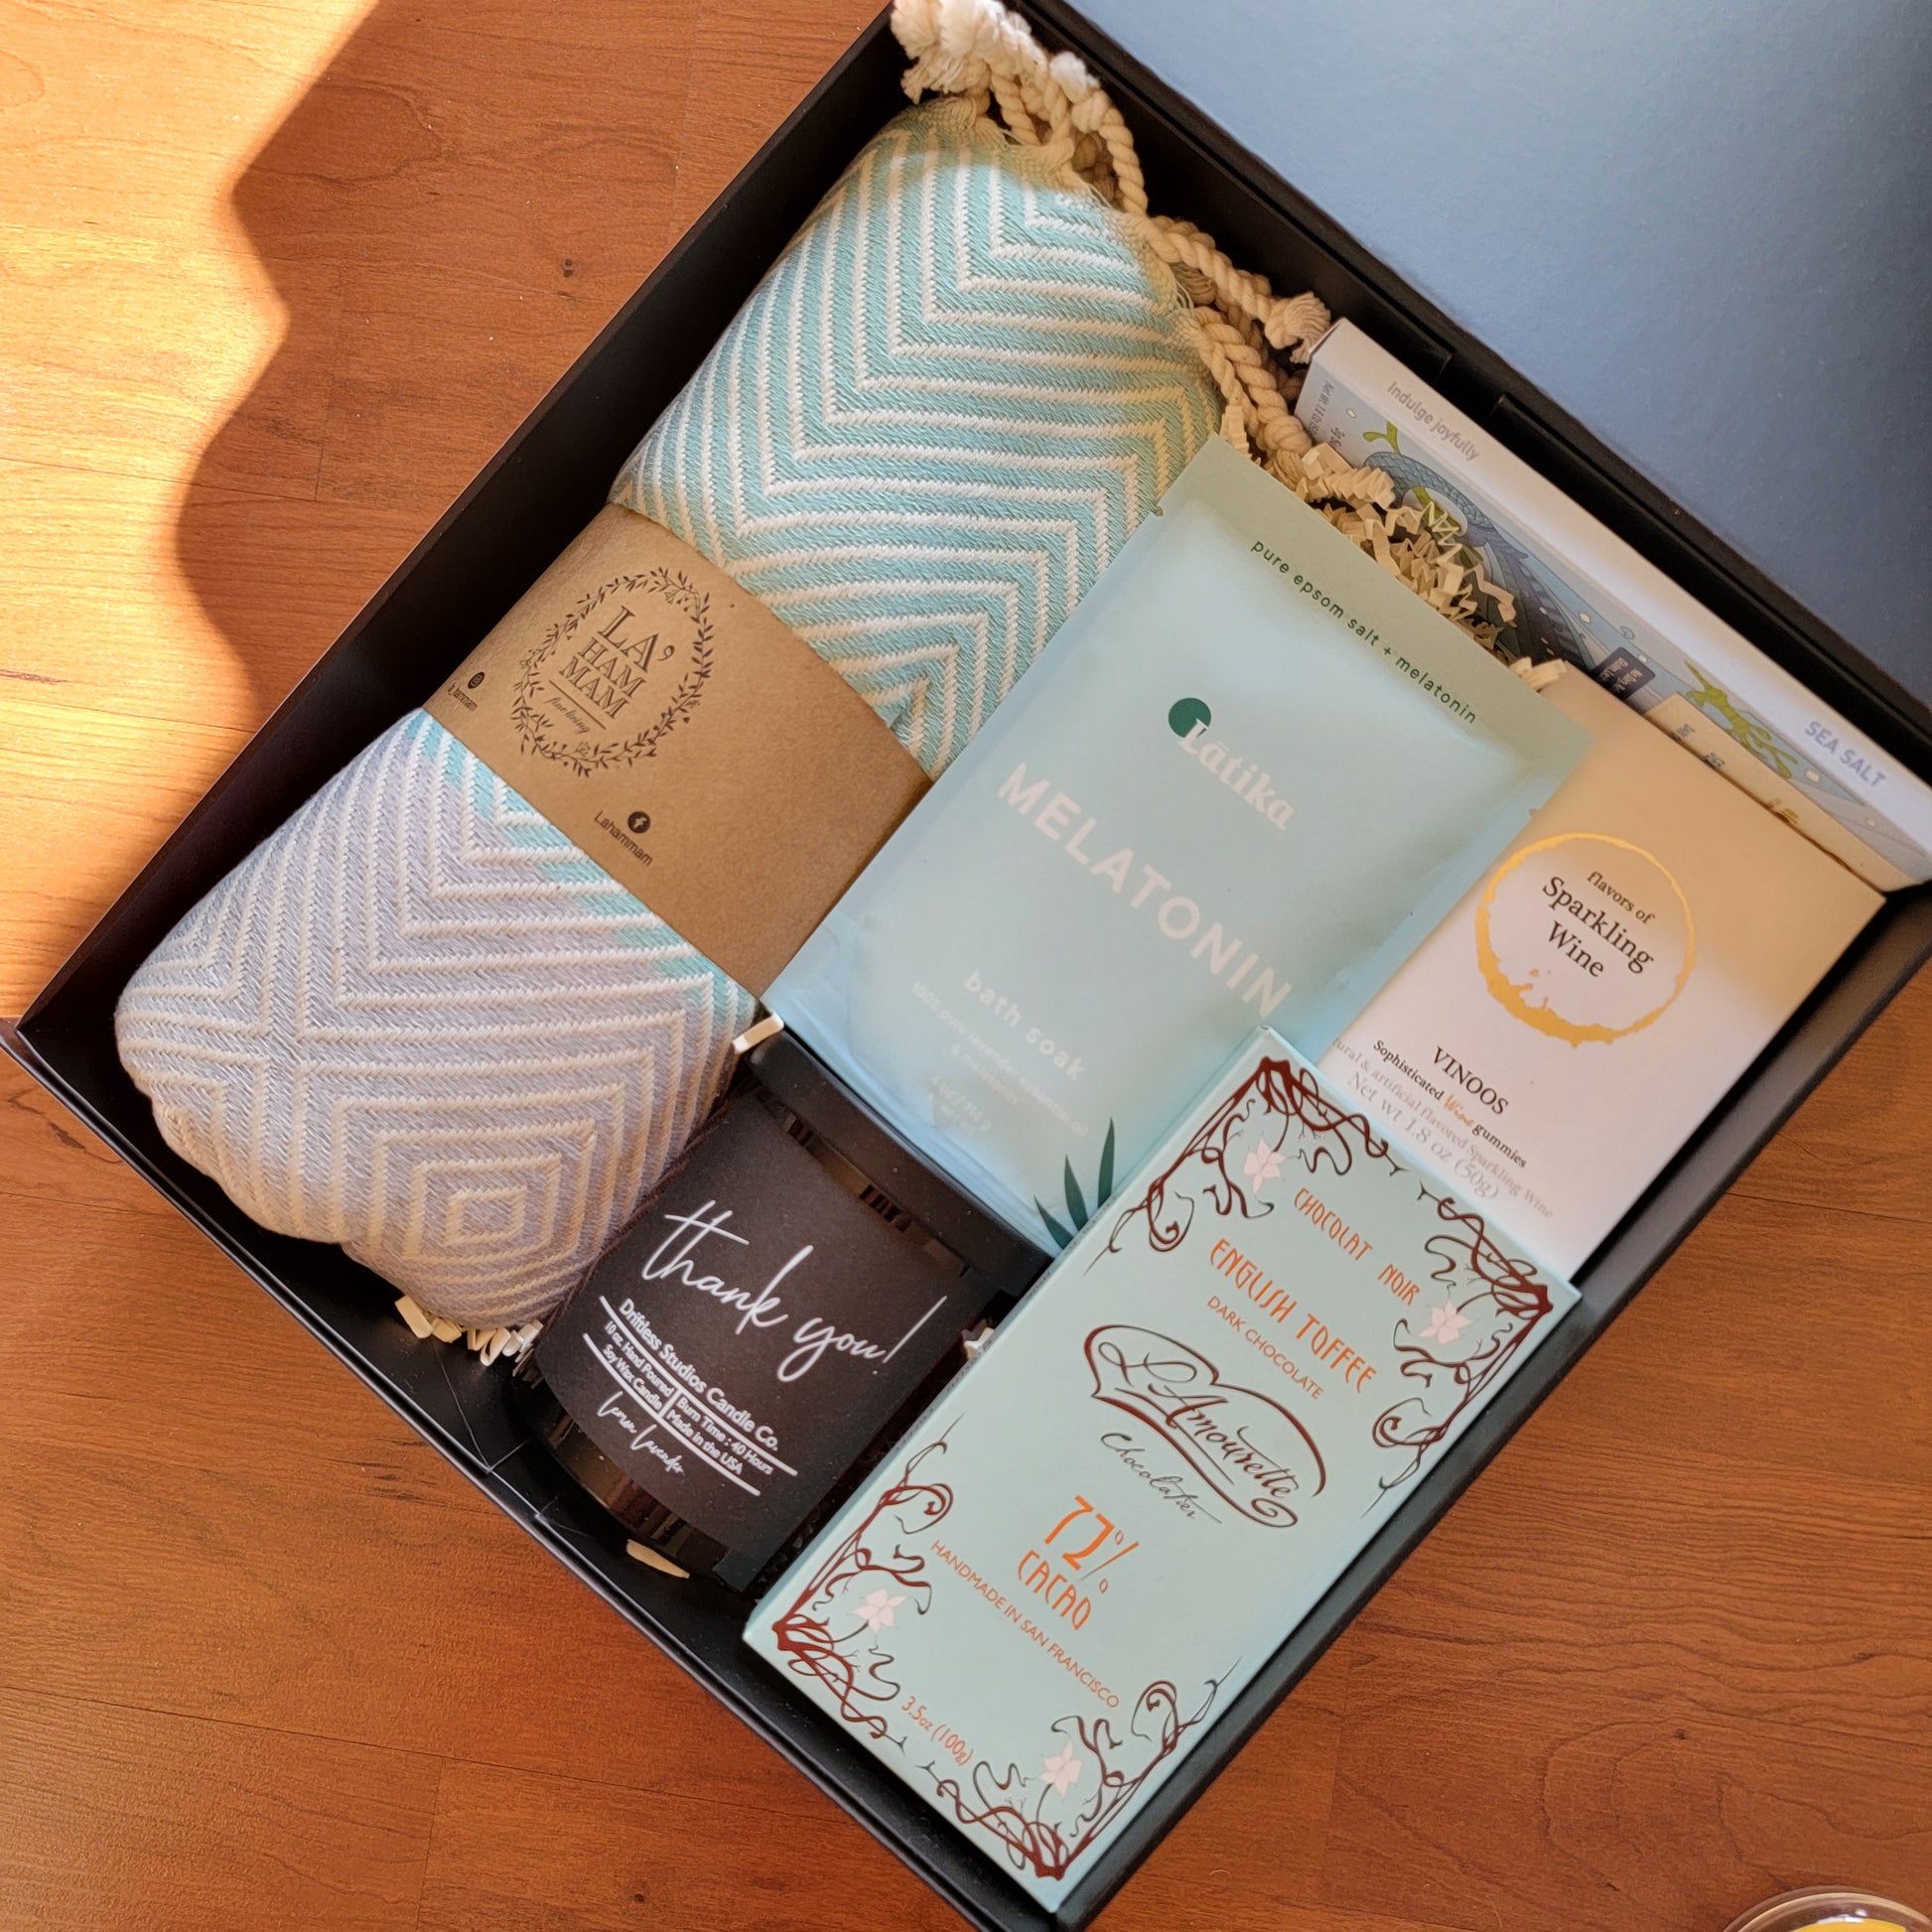 Luxe Gratitude Gift Box for clients